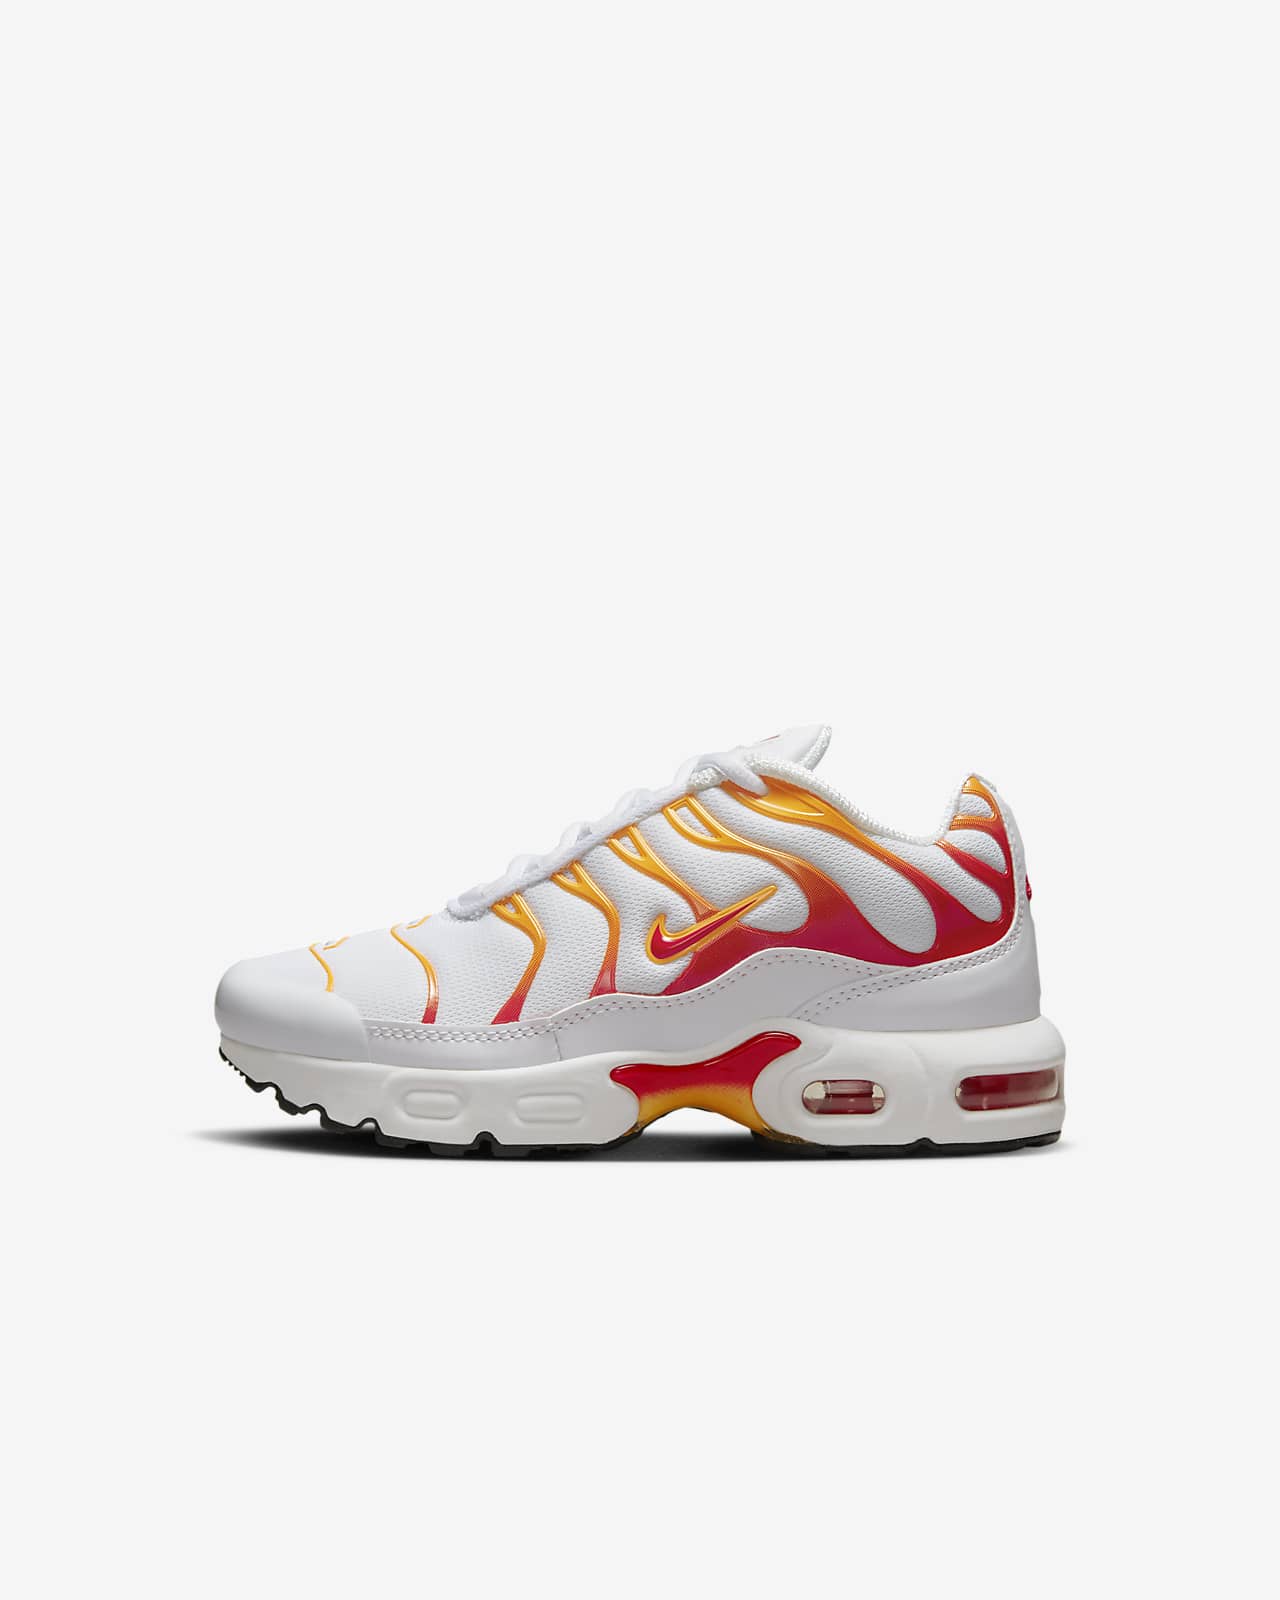 Contiene software cohete Nike Air Max Plus Younger Kids' Shoes. Nike LU